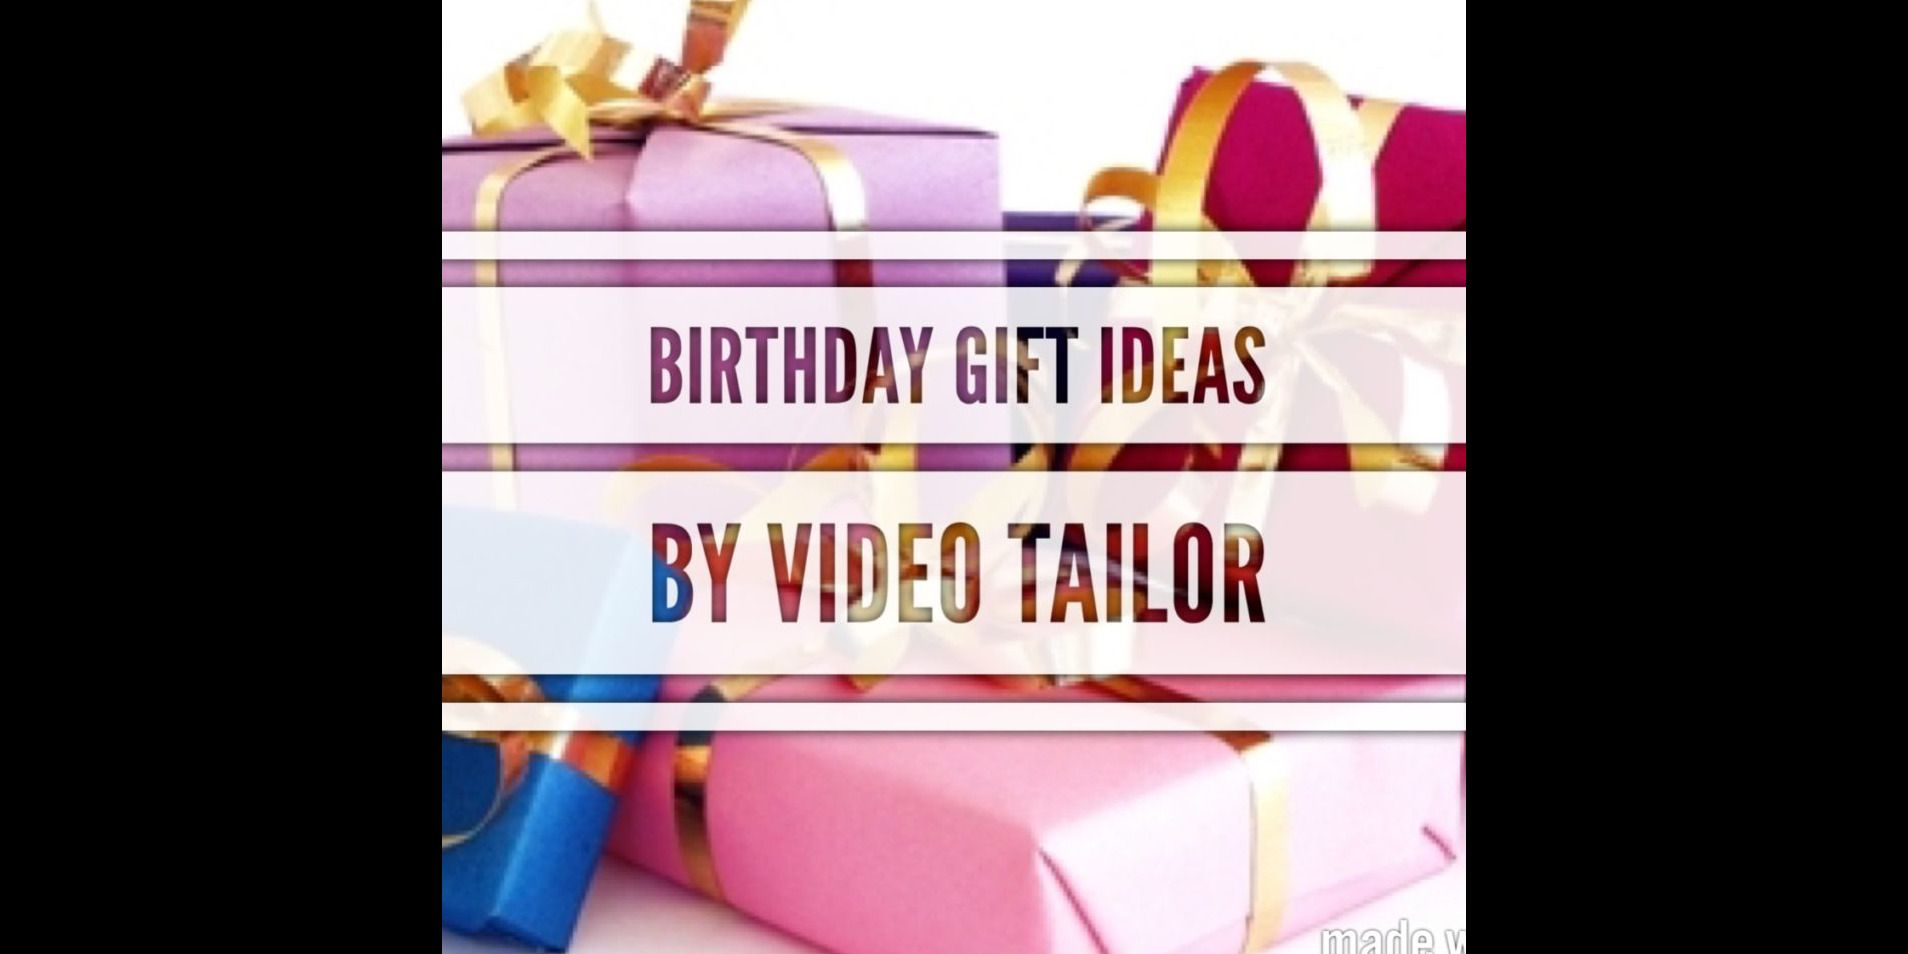 Top 10 Creative and Low Cost Birthday Gift Ideas